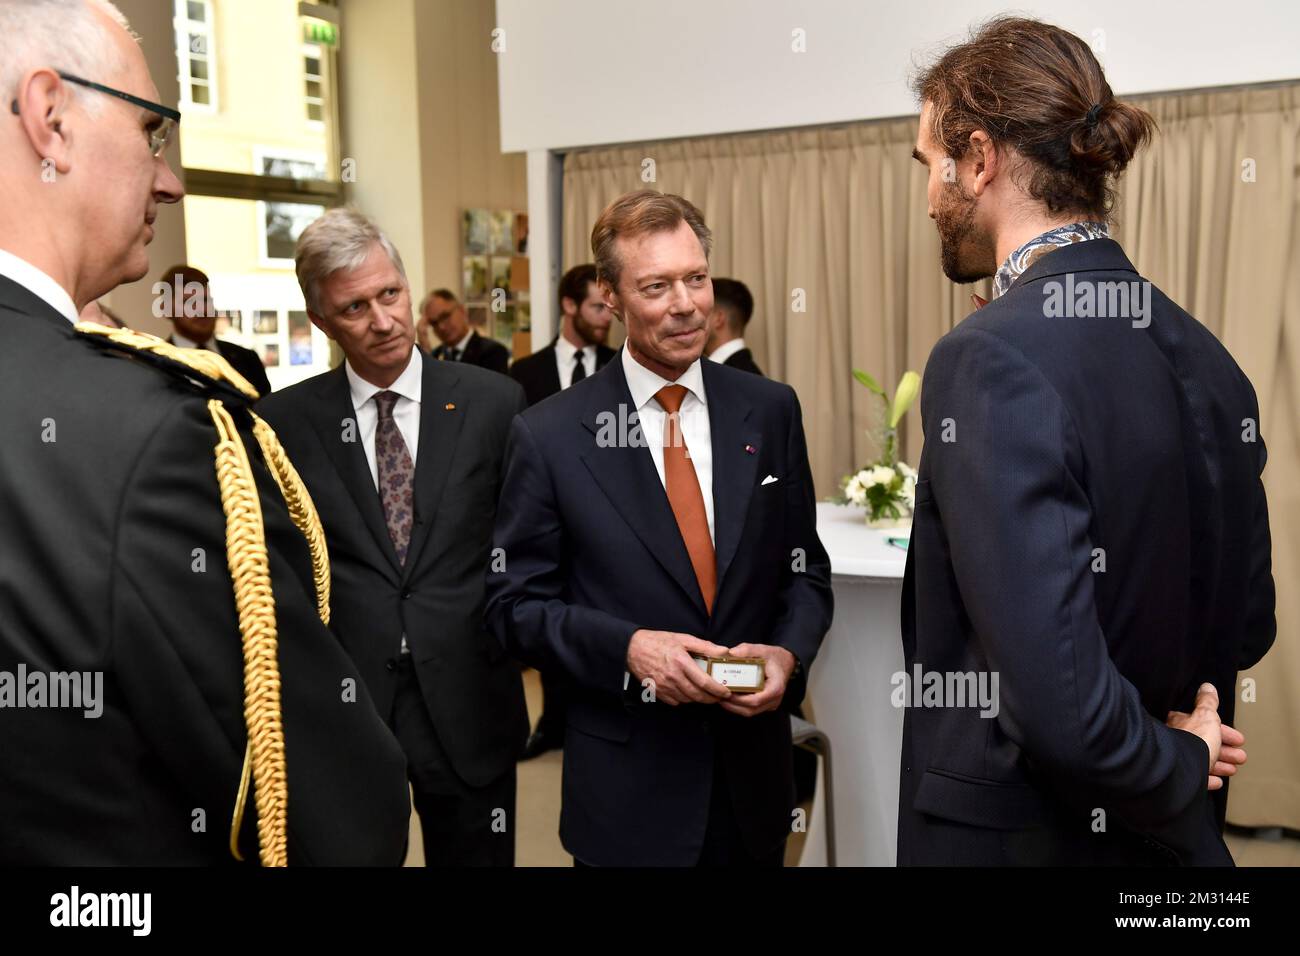 King Philippe - Filip of Belgium, Grand Duke Henri of Luxembourg and Julien  De Wit, Professor of Planetary Sciences at the MIT pictured during a meet  and greet of the Conclusion of